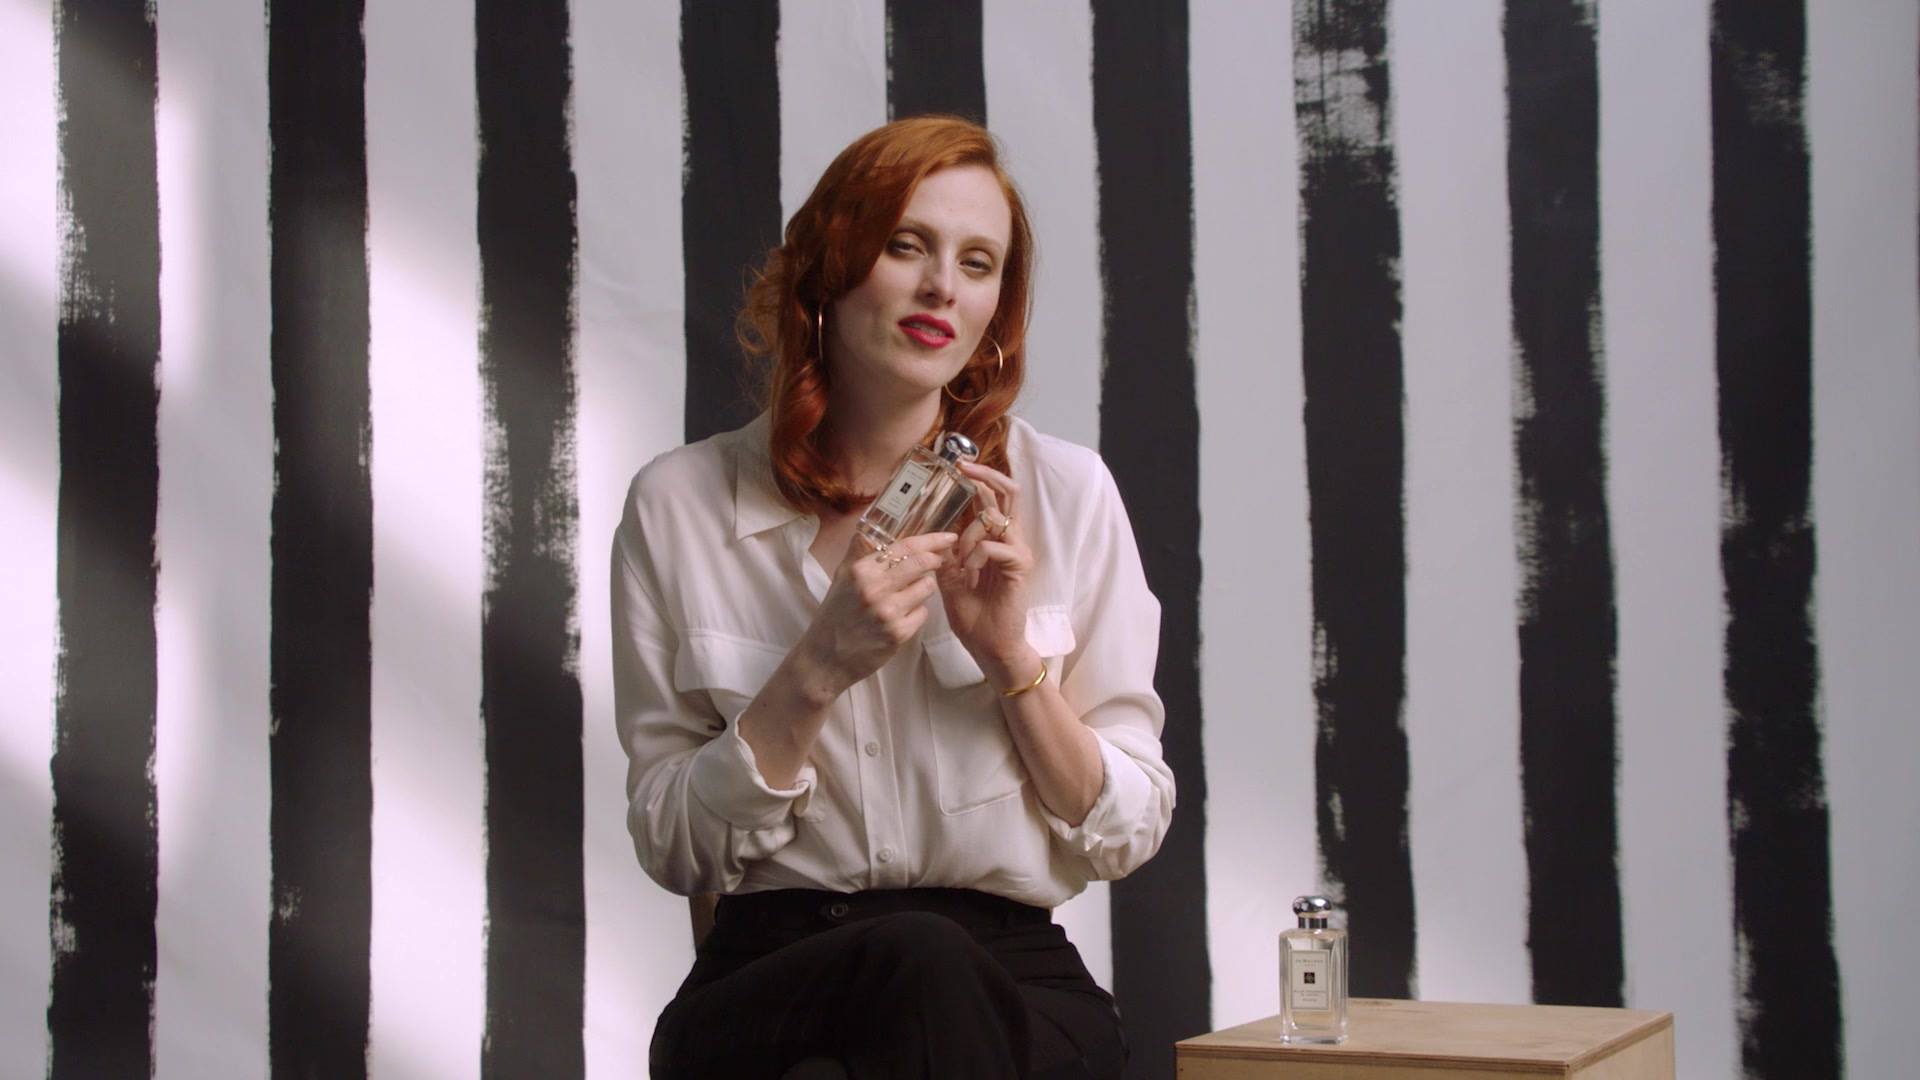 How to take your scent from innocent… to not-so-innocent? Jo Malone London Girl Karen Elson has a few fragrant ideas. #FragranceCombining #JoMaloneLondonGirl #JOMALONELONDON